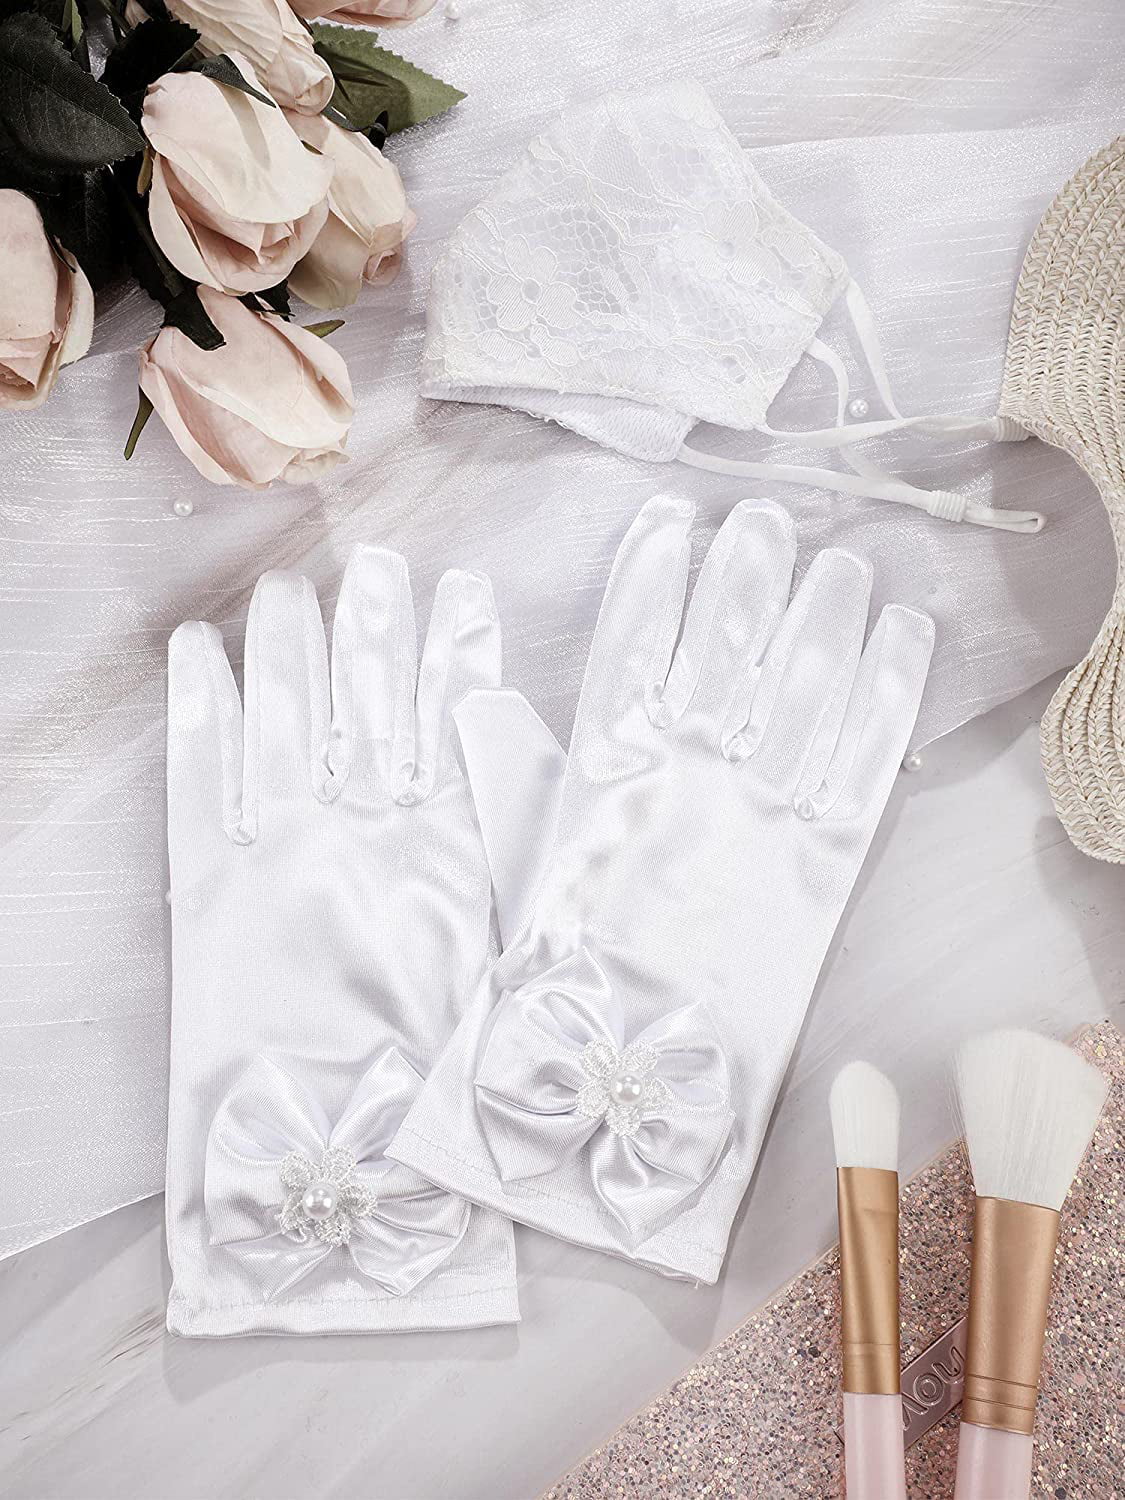 Yahenda 2 Pieces Girls Gorgeous Satin Fancy Princess Gloves Elegant White Short Gloves with Bows and Communion Face Covering Lace Cloth Mouth Cover for Kids Party Wedding 